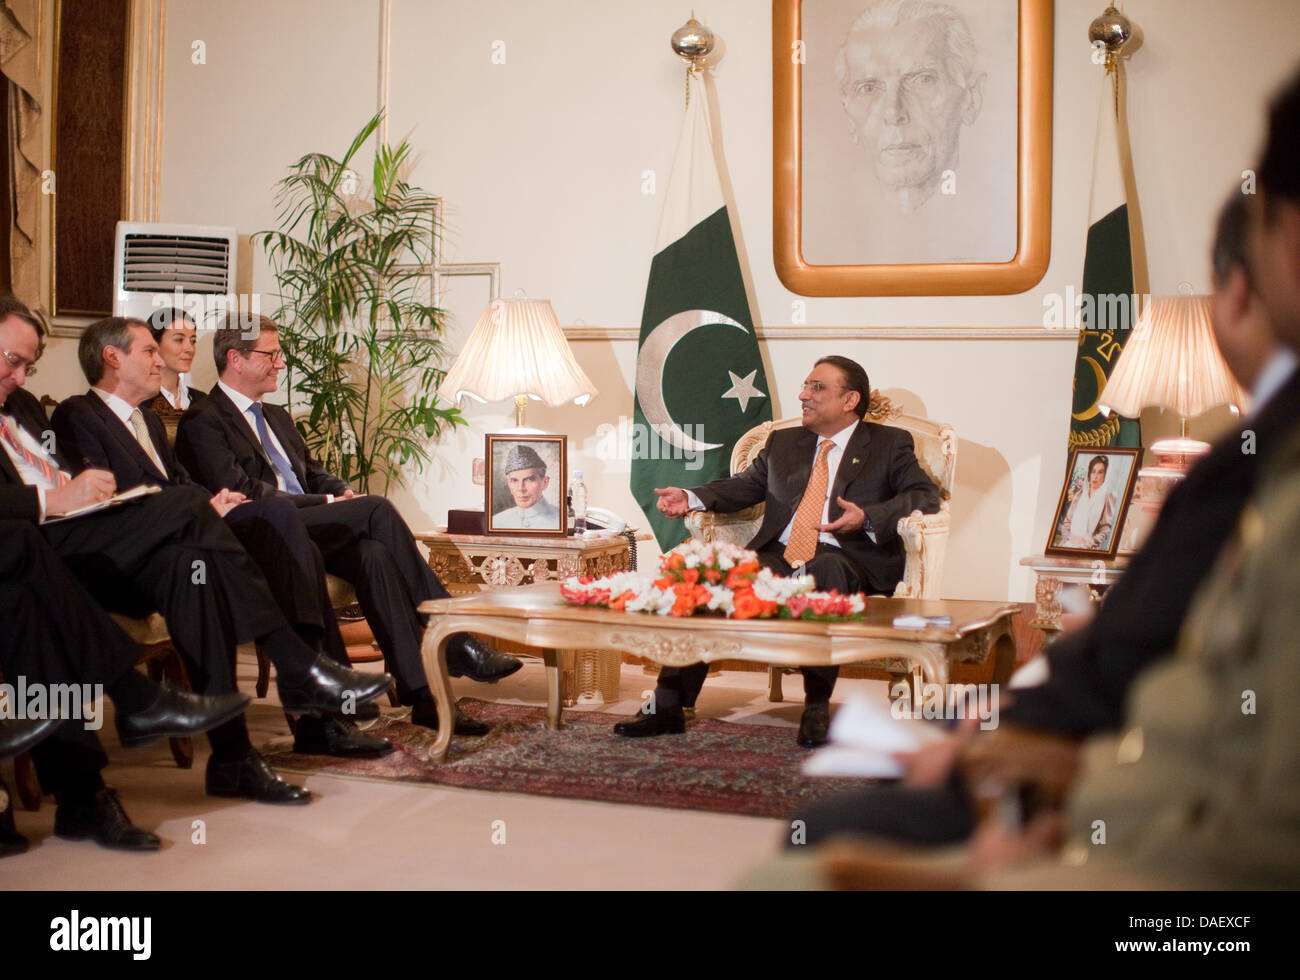 German Foreign Minister Guido Westerwelle and the Federal Special Envoy for Pakistan and Afghanistan,  Michael Steiner (L), meet for talks with the President of Pakistan Asif Ali Zardari (C) in Islamabad, Pakistan, 18 November 2011. Westerwelle is on a one-day visit to Pakistan. Photo: MICHAEL KAPPELER Stock Photo